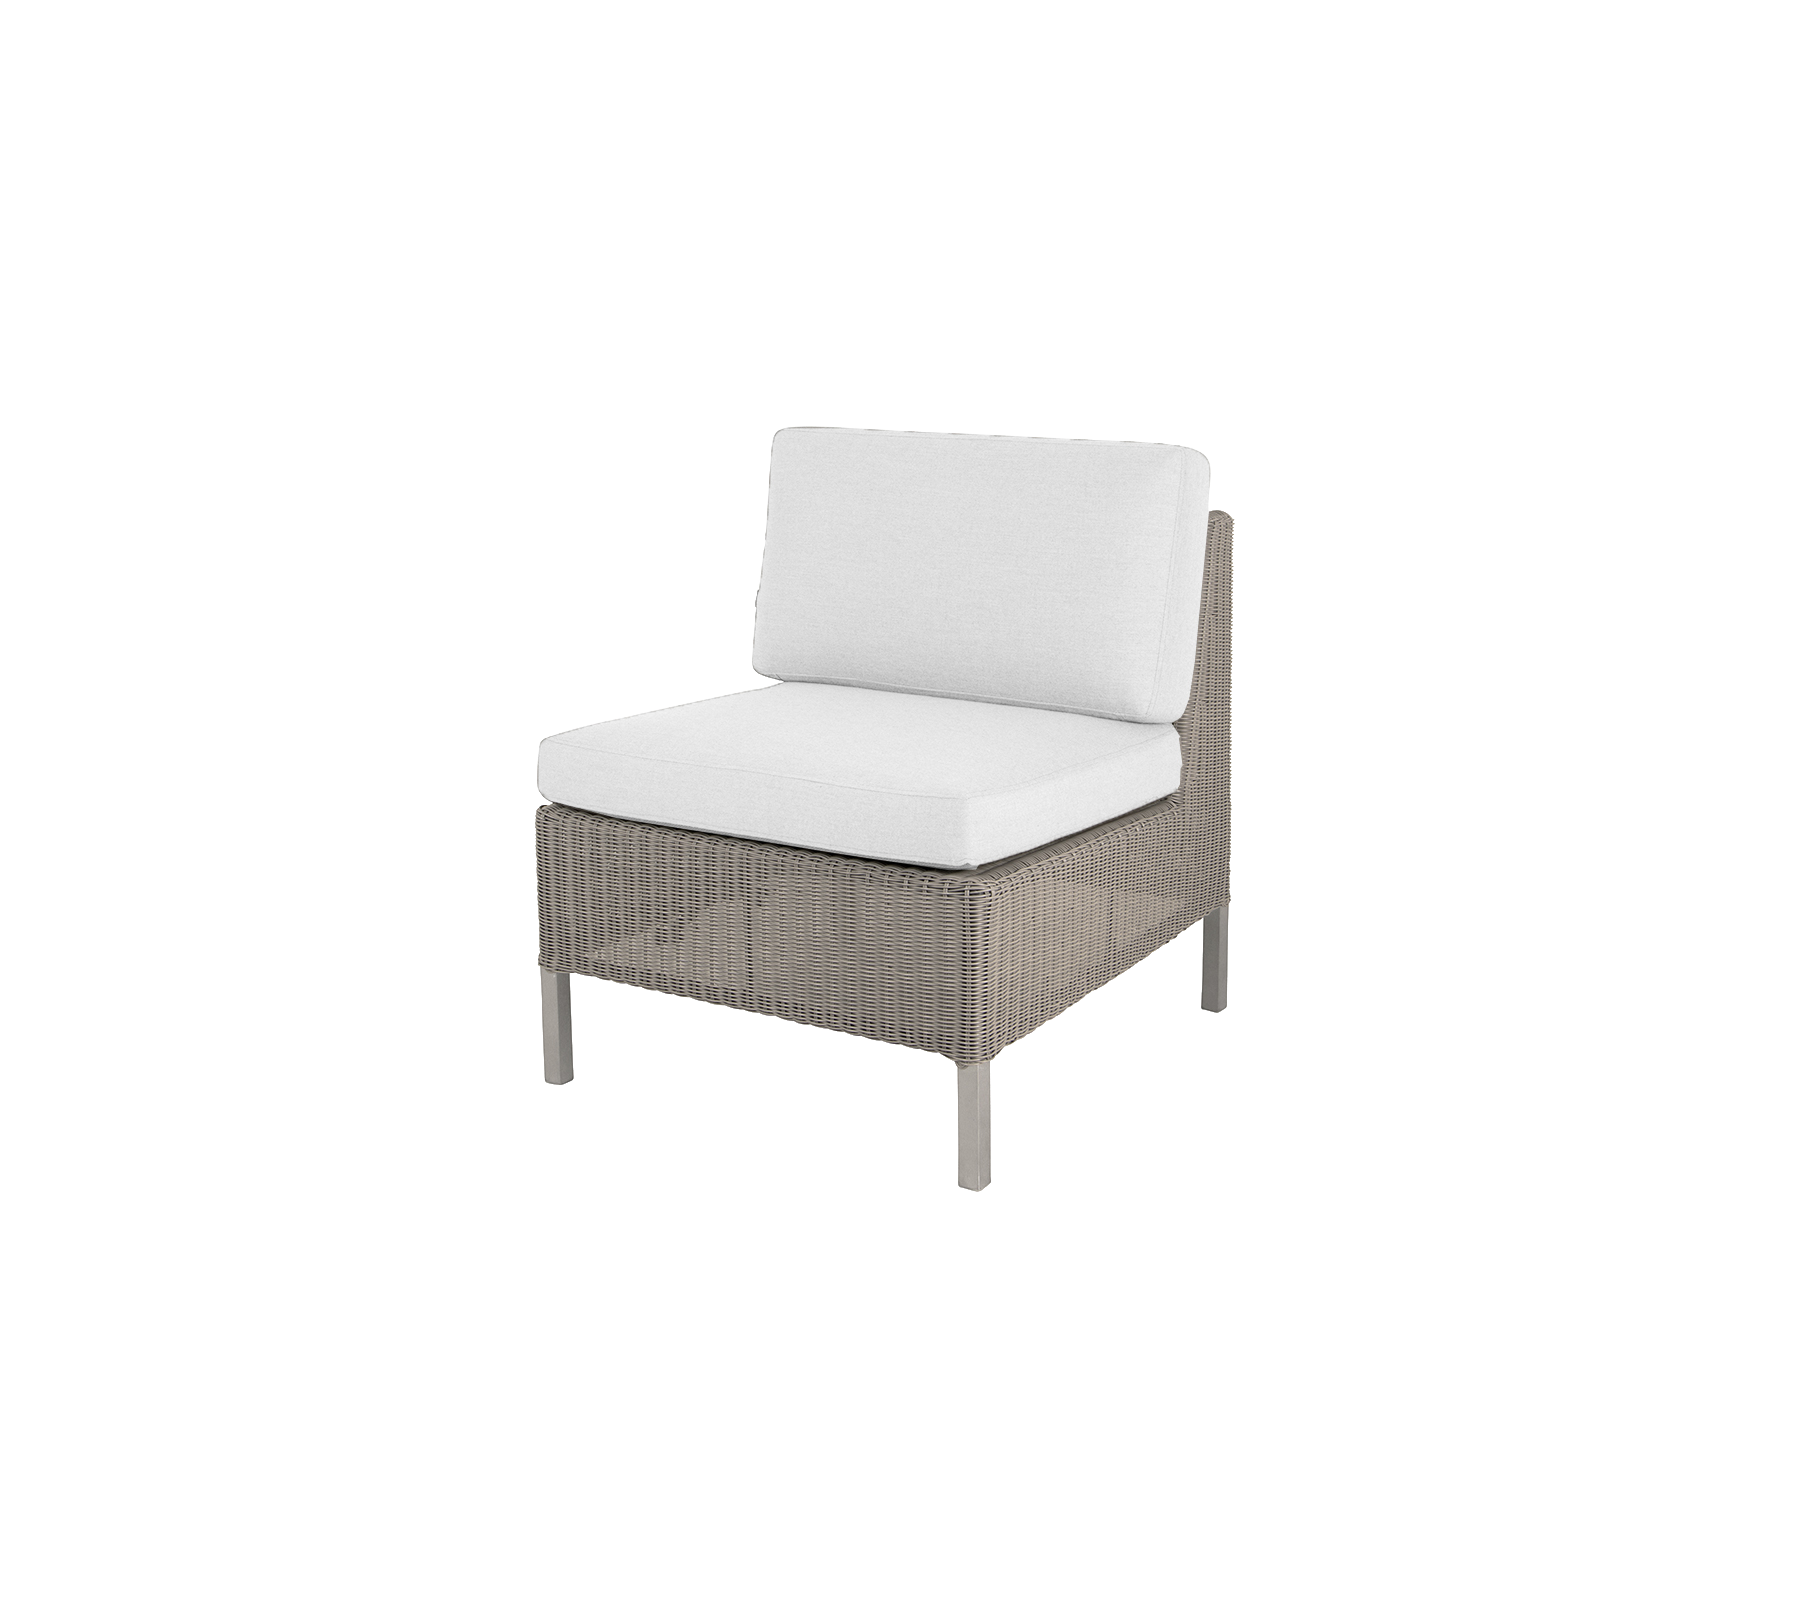 Connect dining lounge single seater module